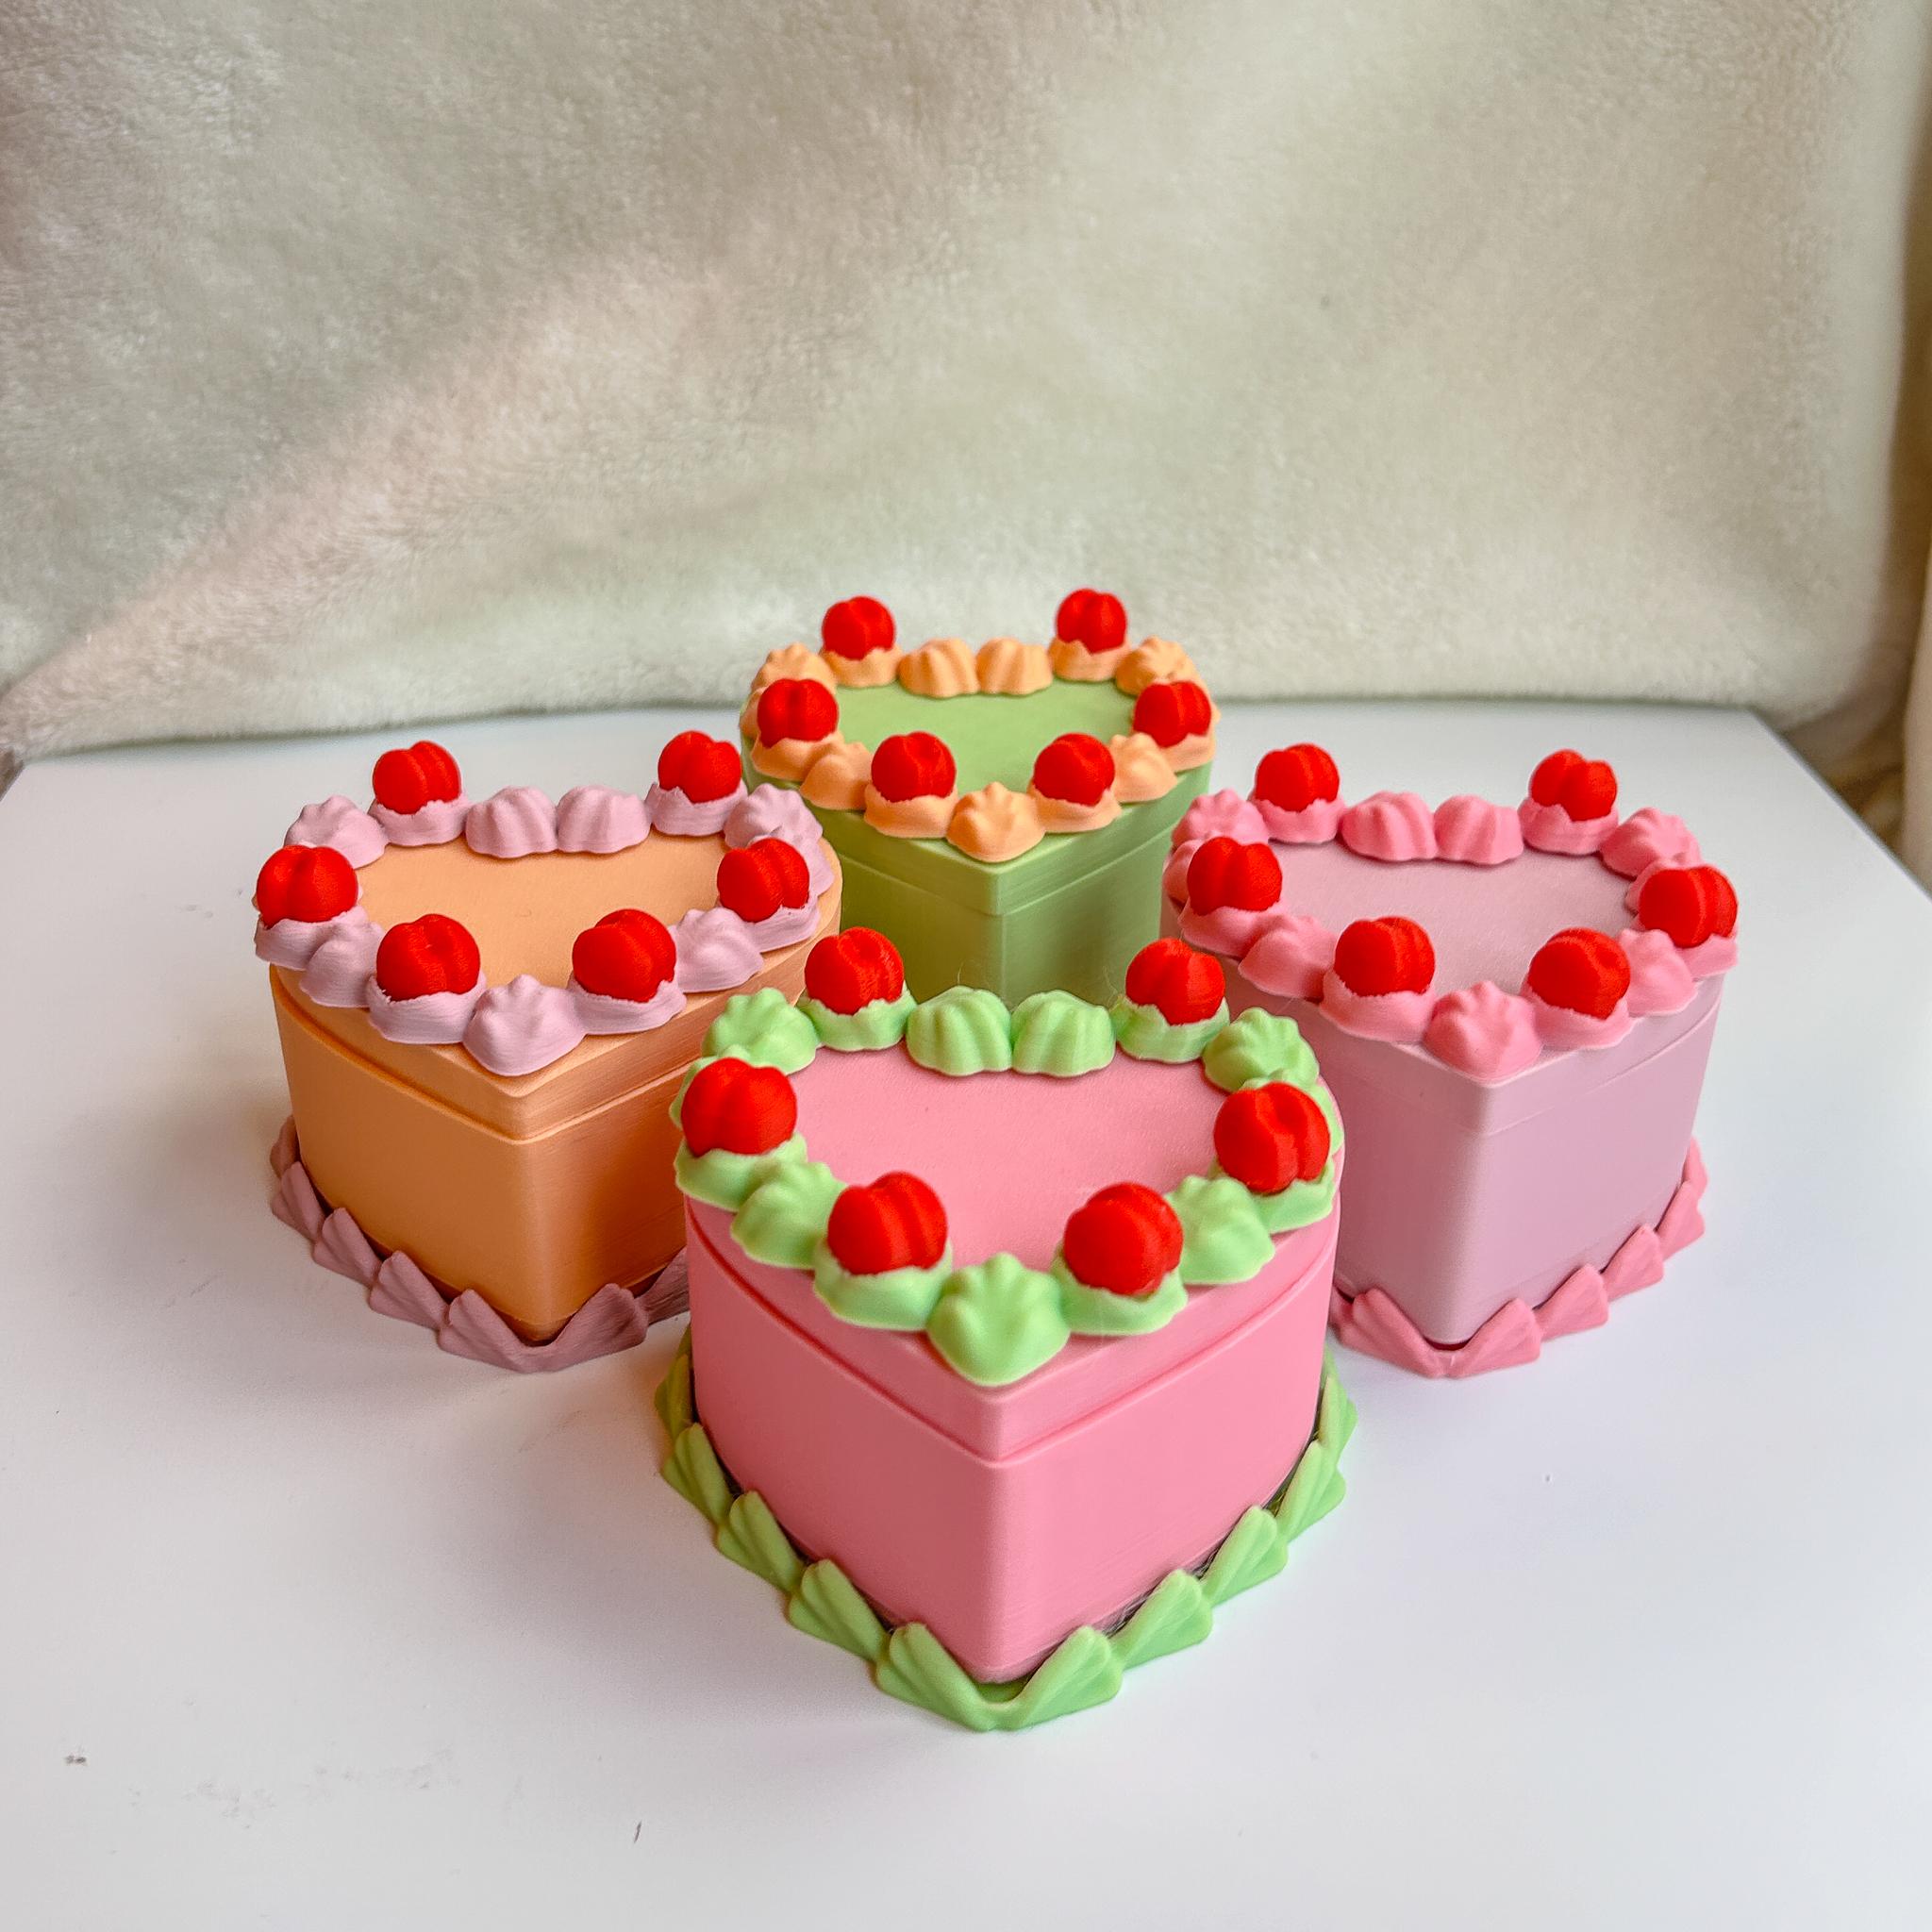 Heart-Shaped Cake Jewelry Box - Vintage, Kitsch Cake Container and Gift Holder 3d model